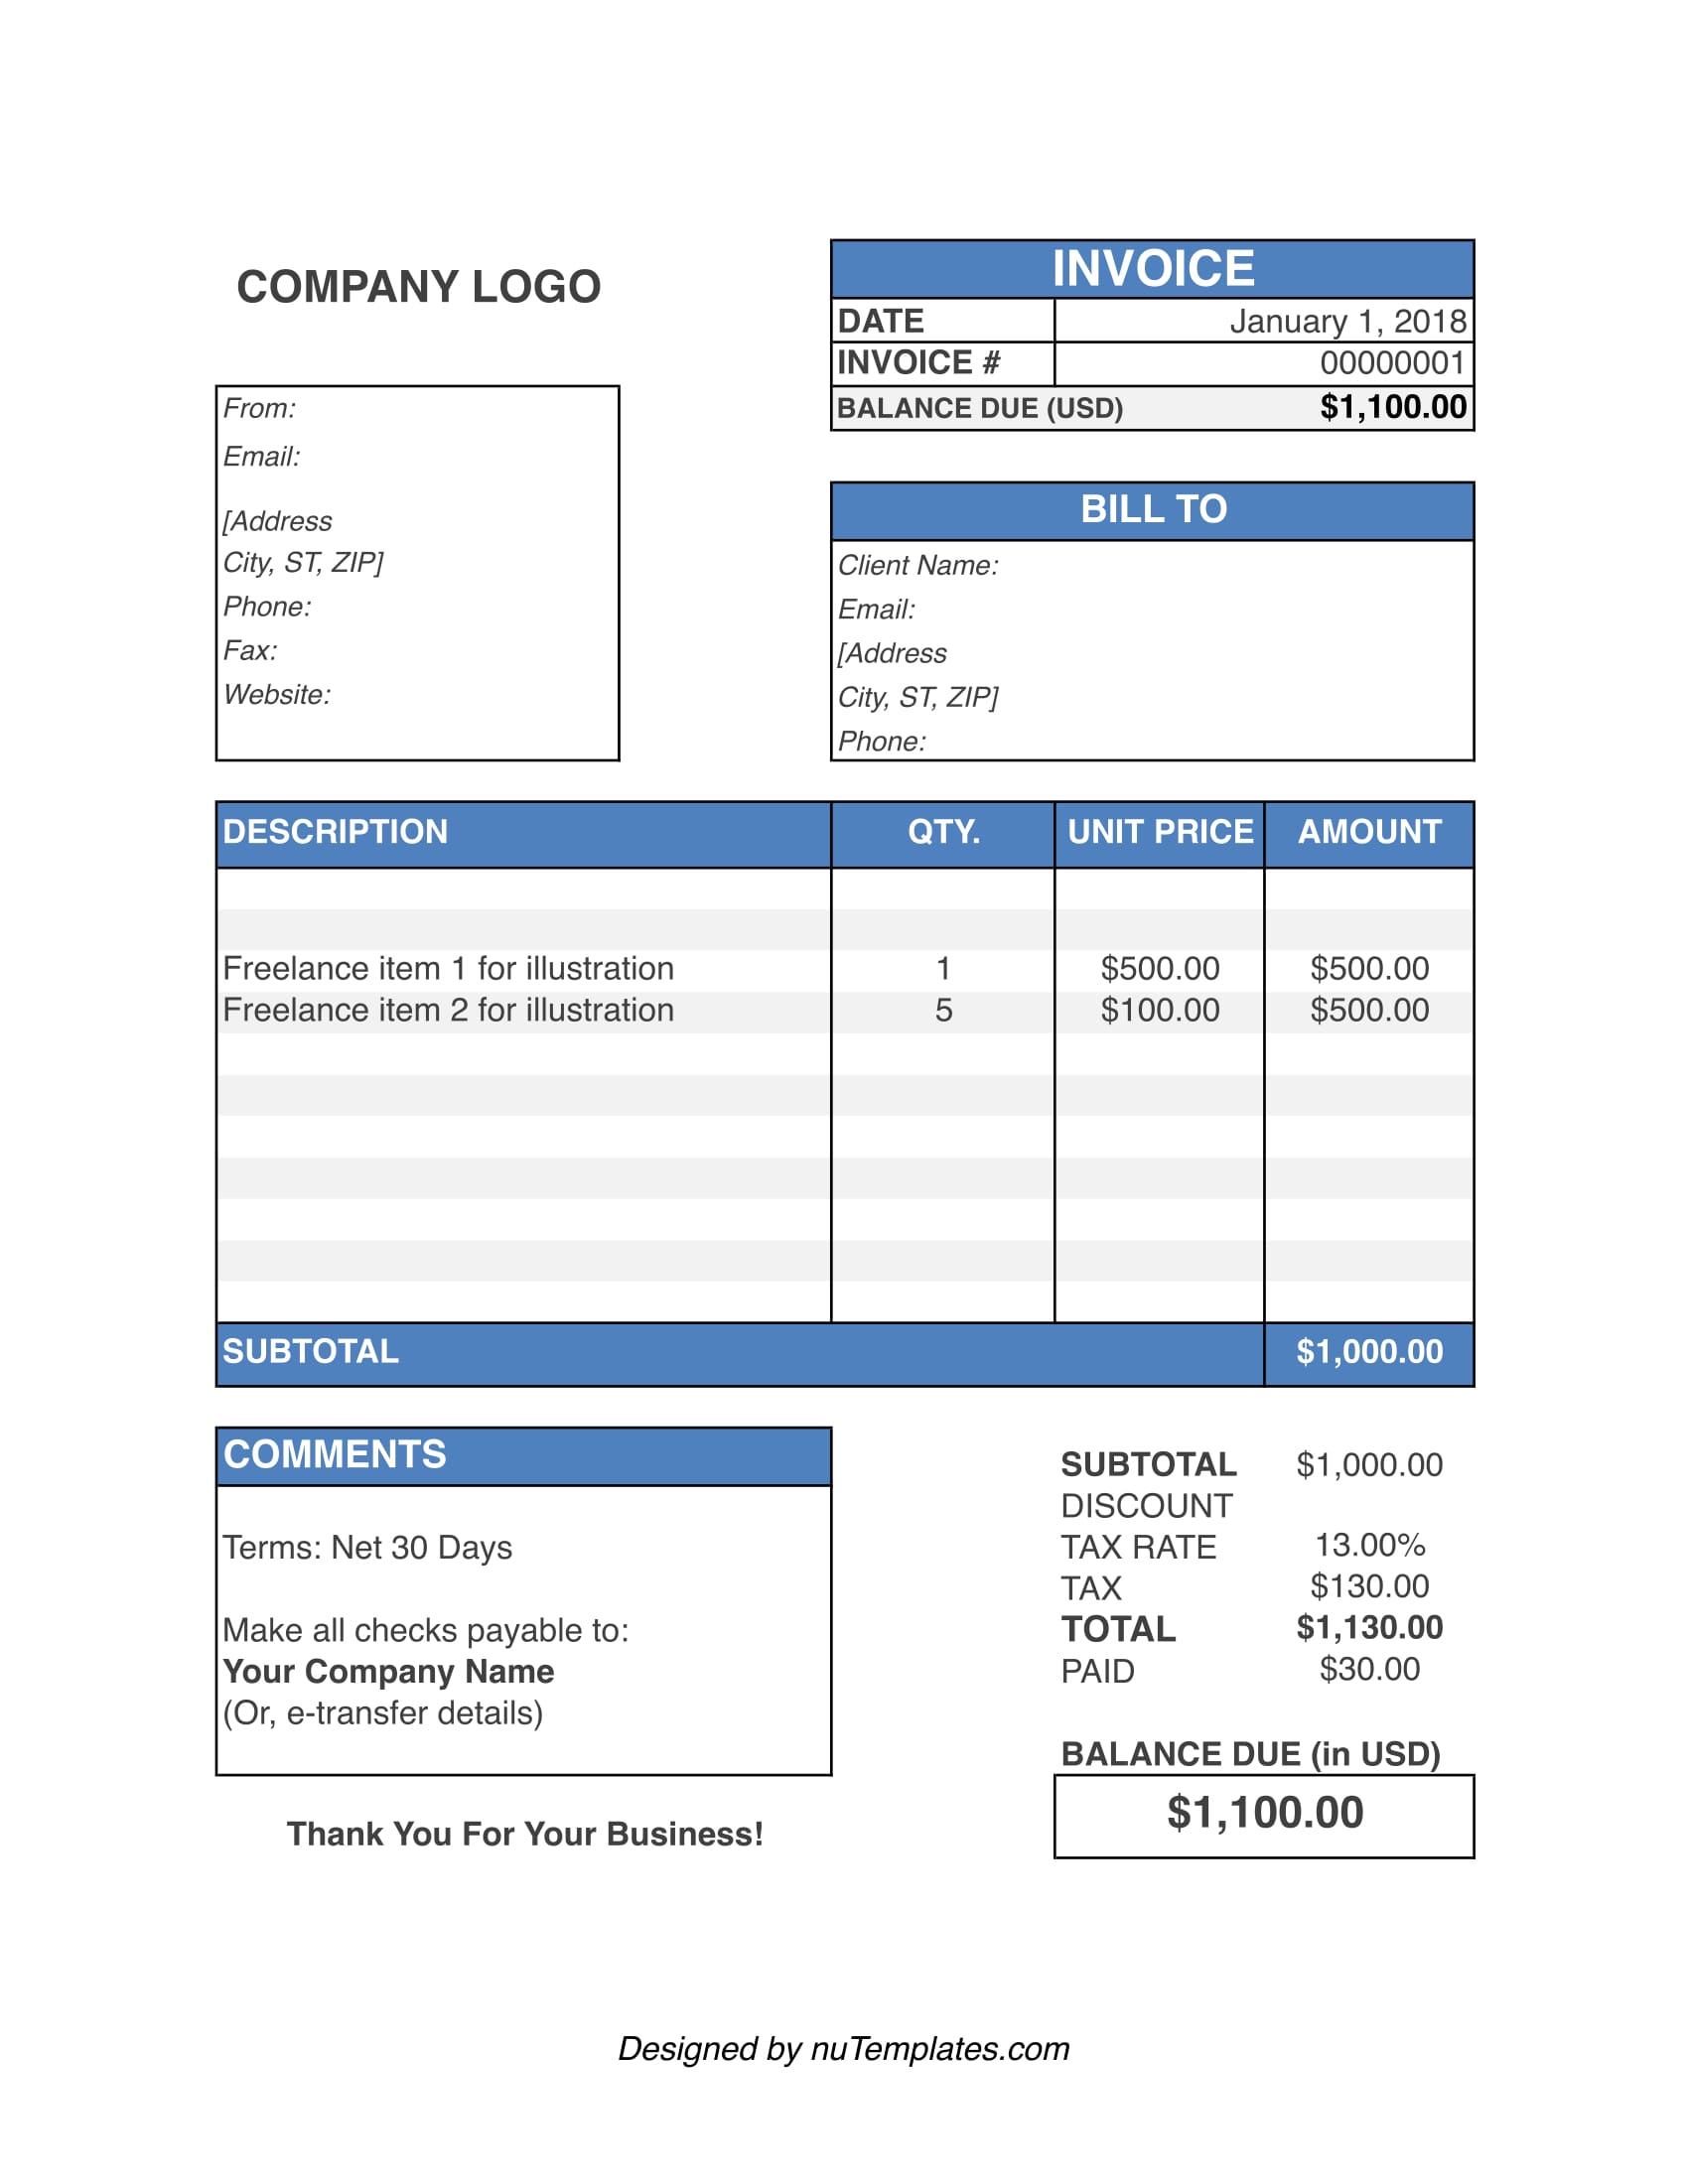 Freelance Invoice Template Freelance Invoices nuTemplates